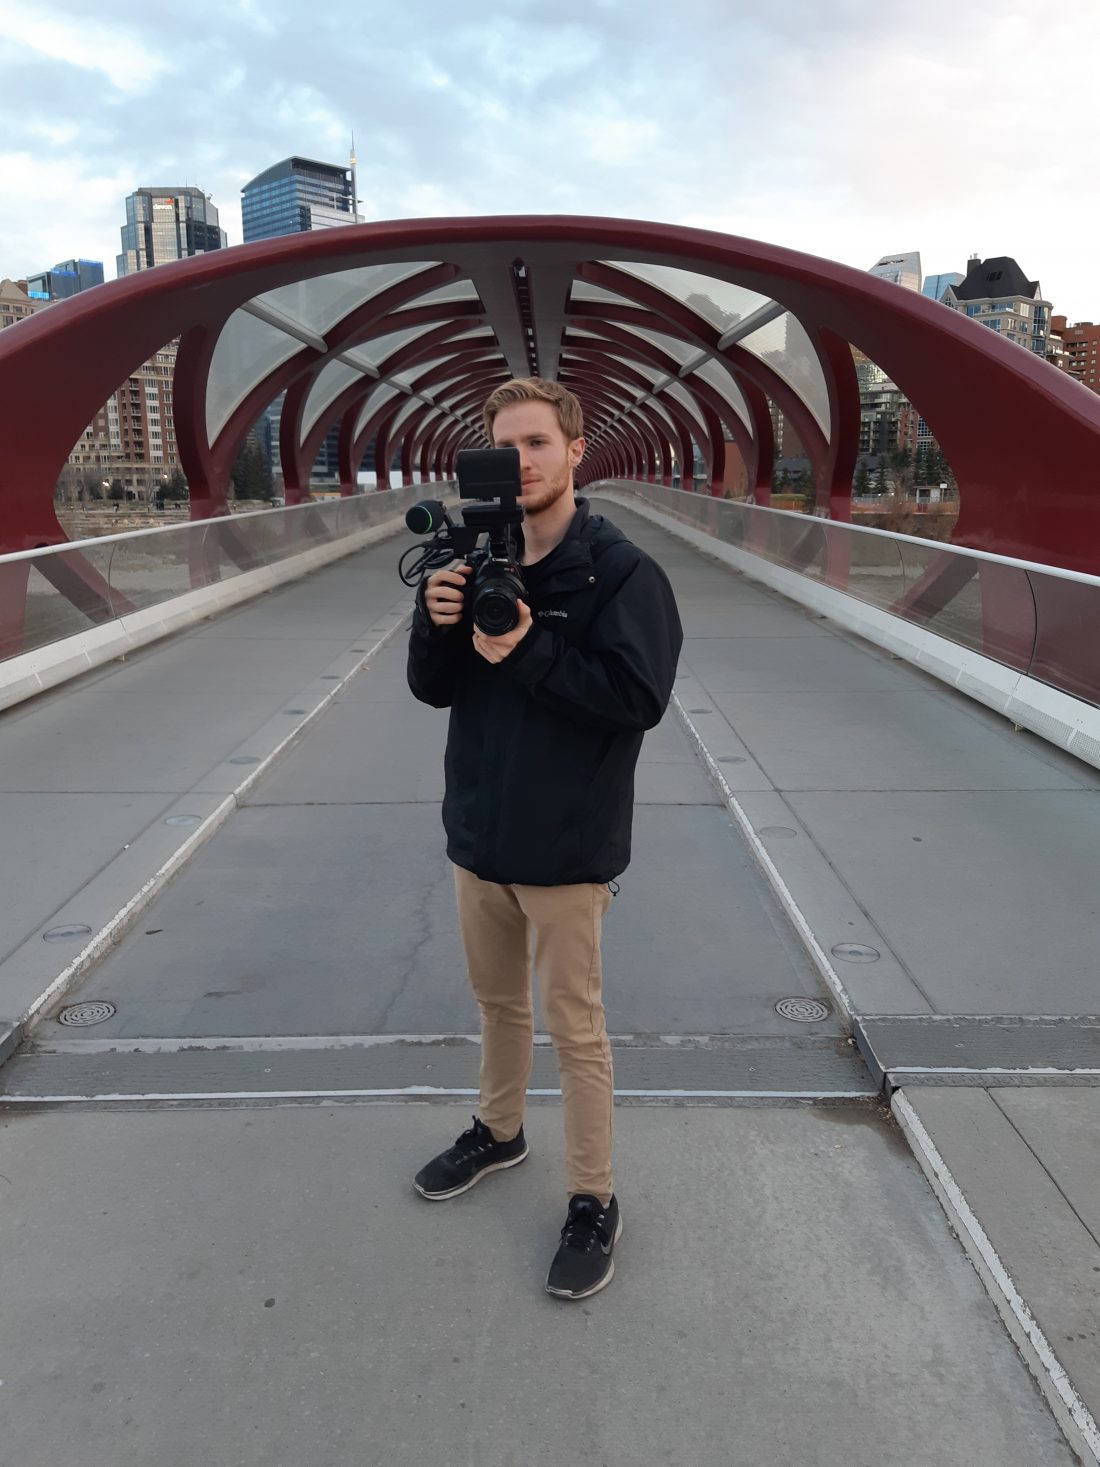 Sam stands in the middle of a bridge filming